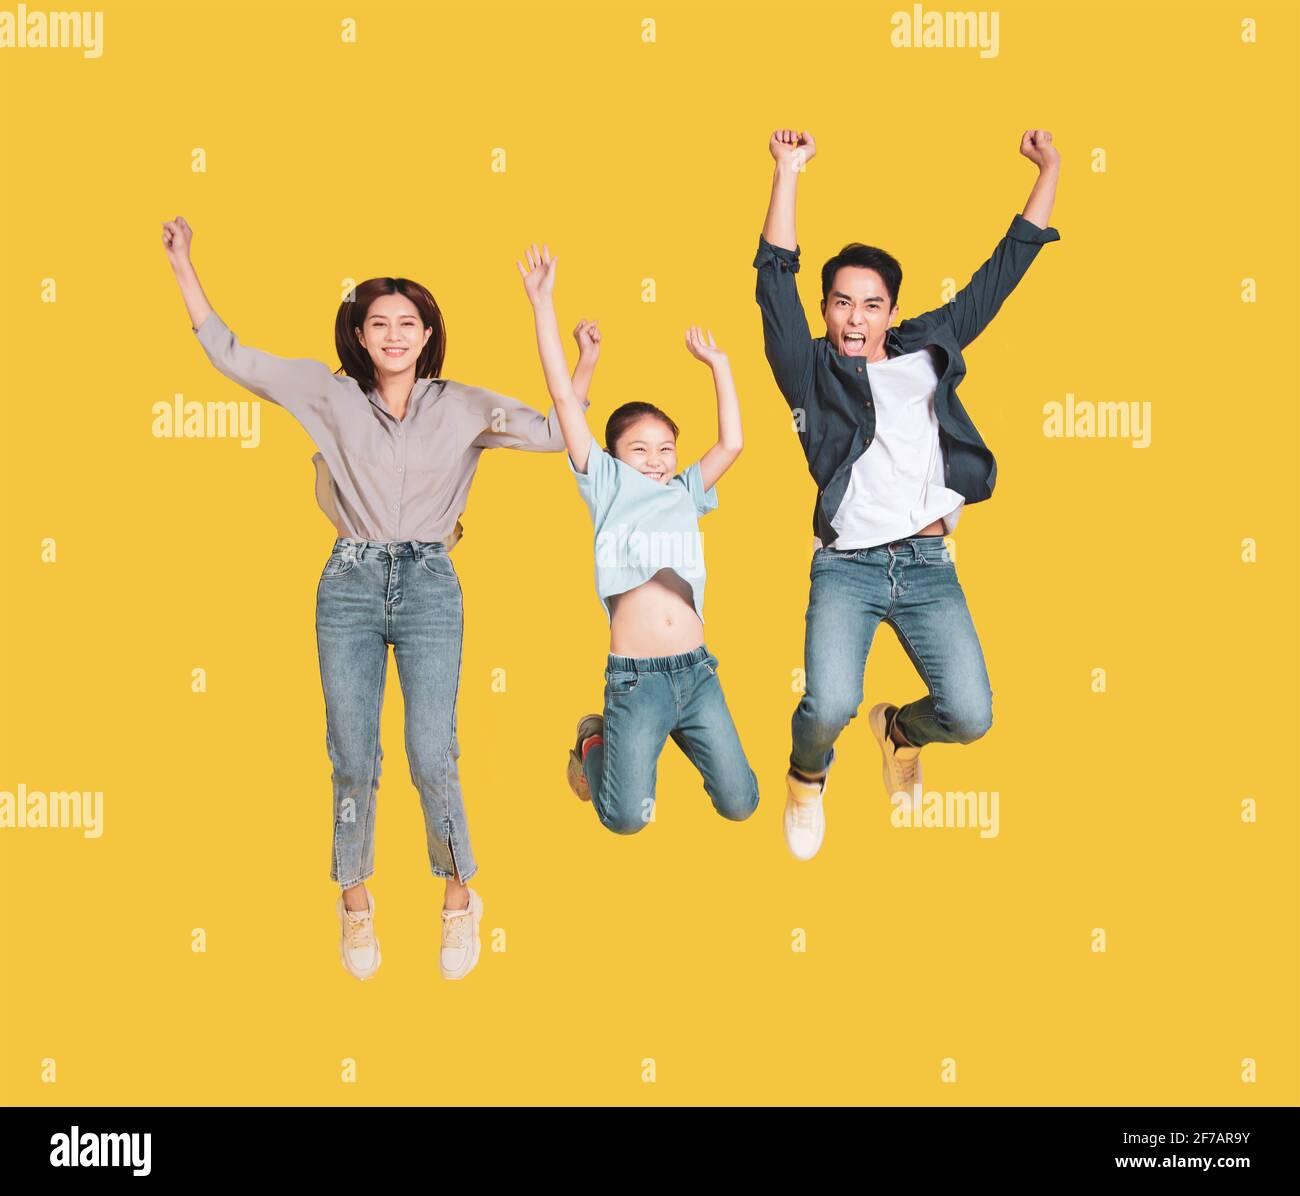 Happy young family with one child jumping together Stock Photo